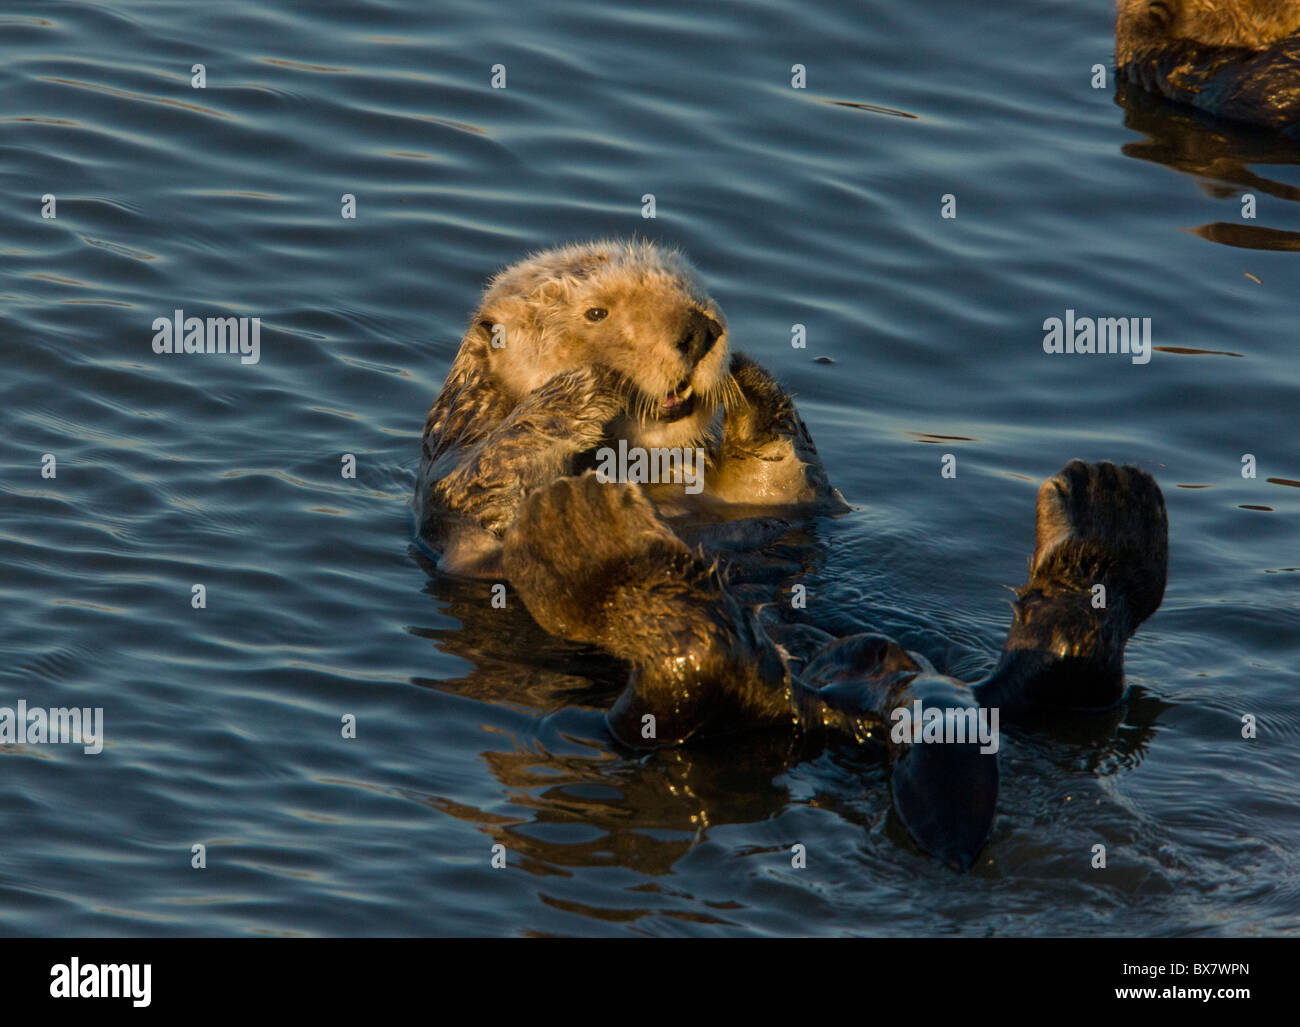 Sea otter Enhydra lutris, relaxing floating on its back in the sea; southern California. Stock Photo